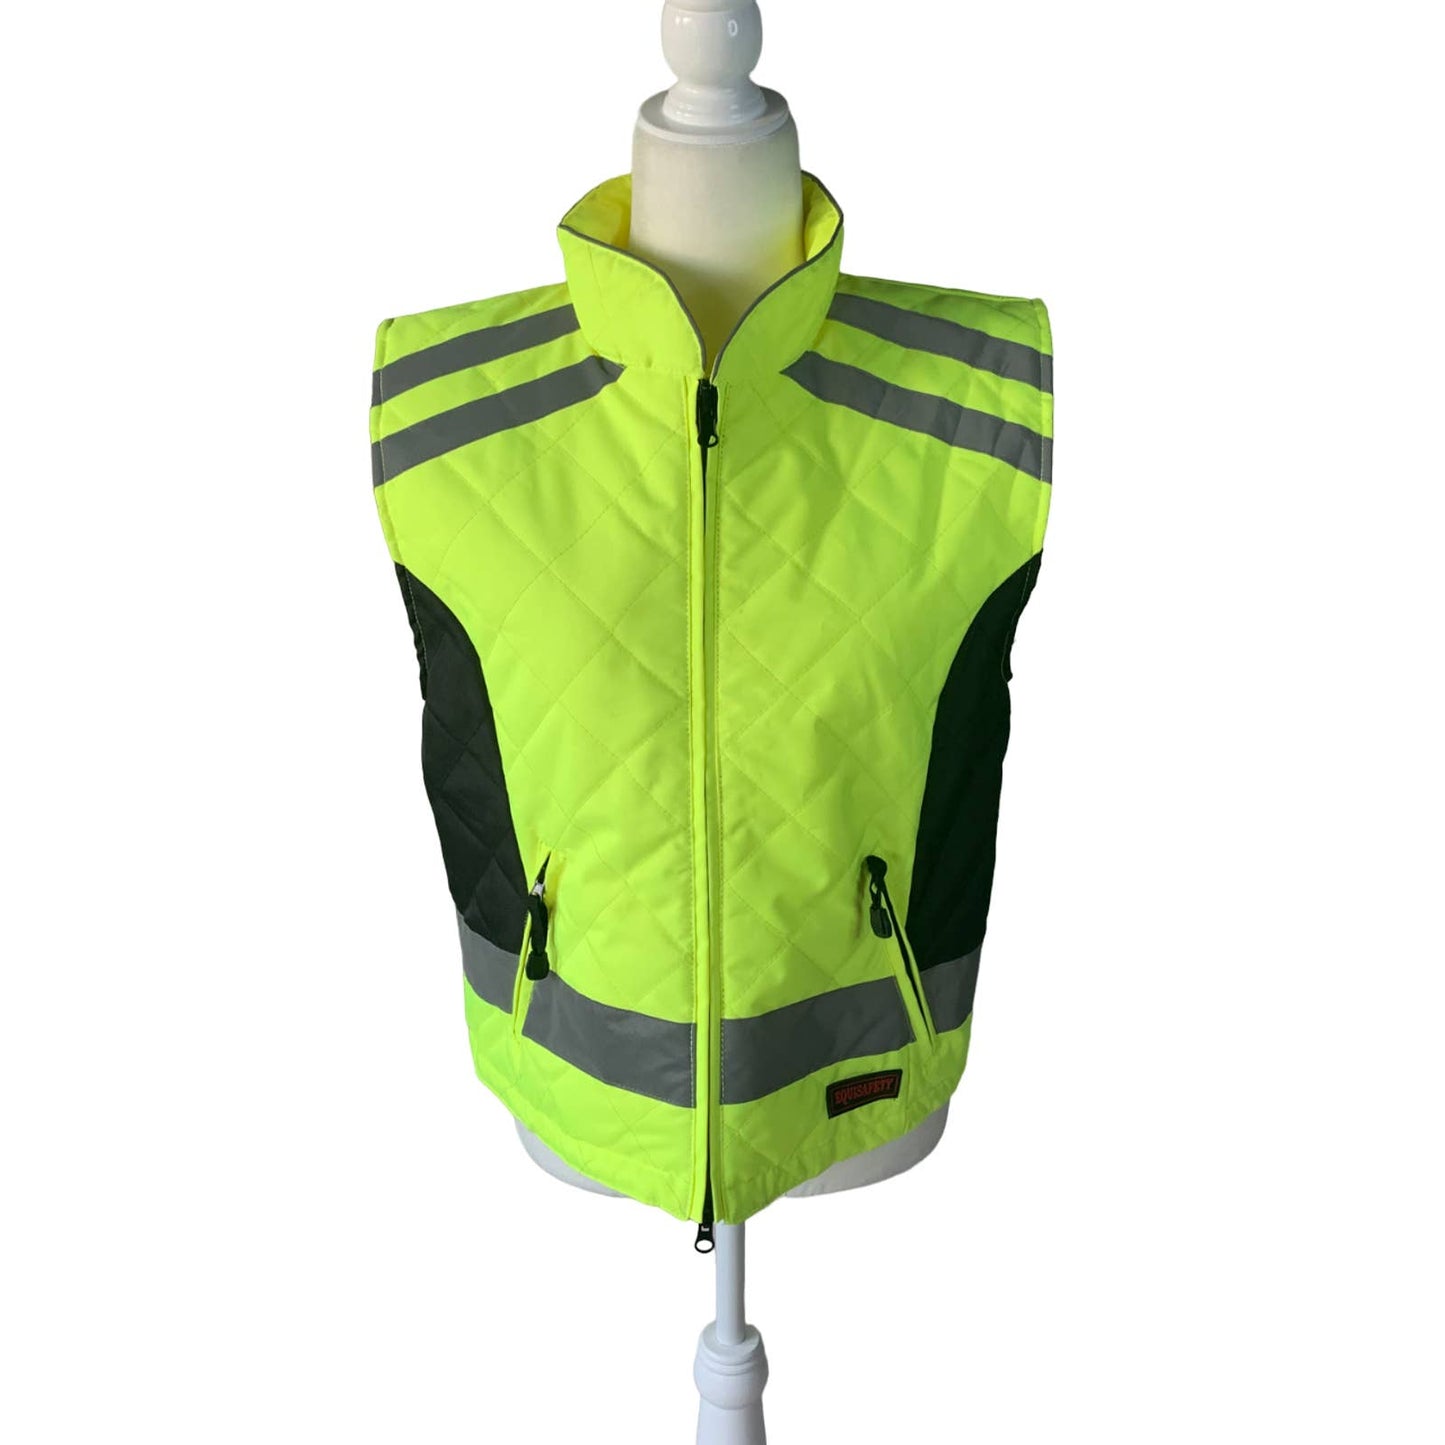 Equisafety Safety Riding Vest in Yellow - Woman's Medium